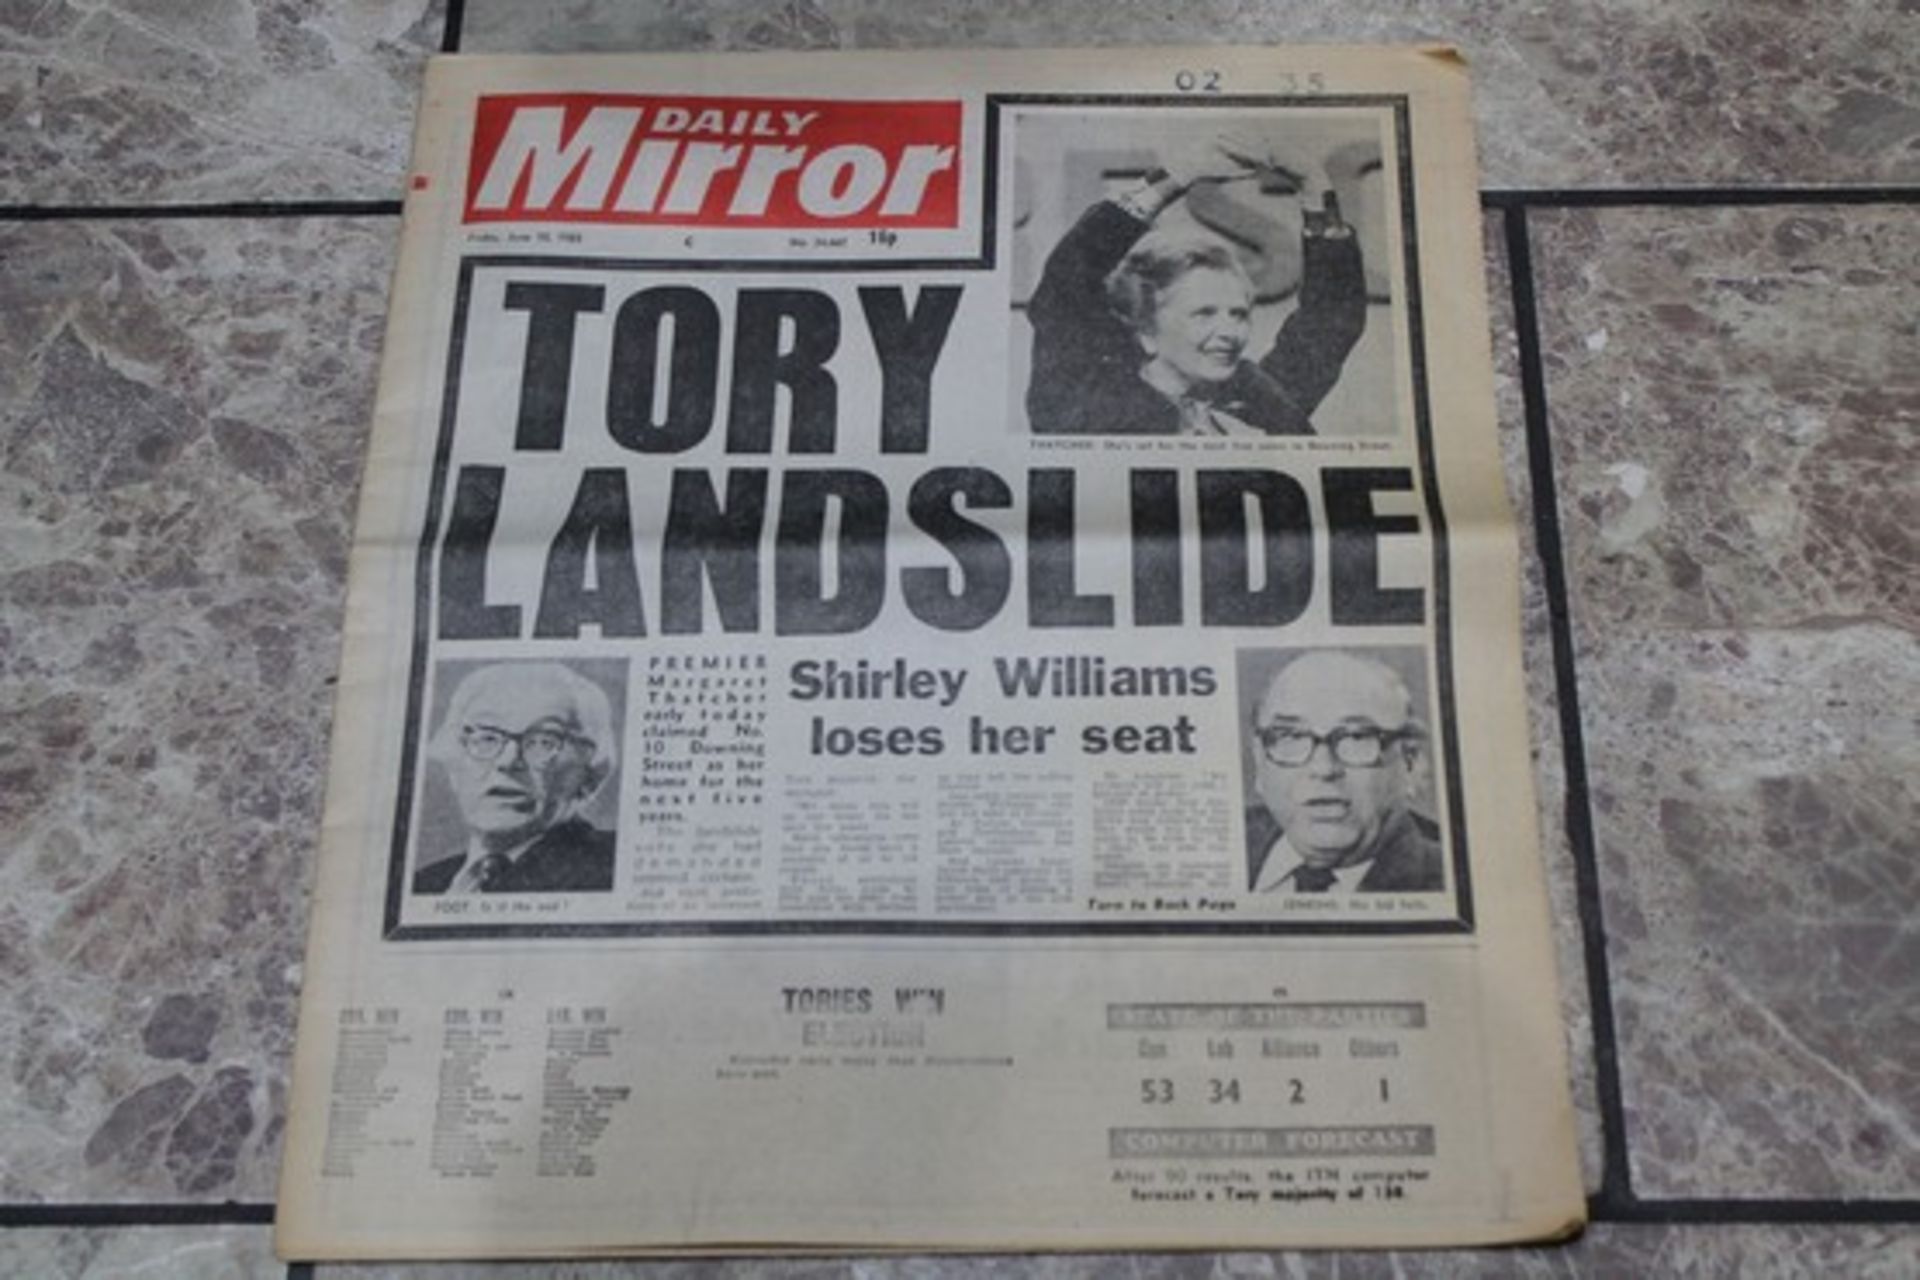 **FRIDAY, JUNE 10, 1983** DAILY MIRROR. FRONT COVER: TORY LANDSLIDE, SHIRLEY WILLIAMS LOSES HER